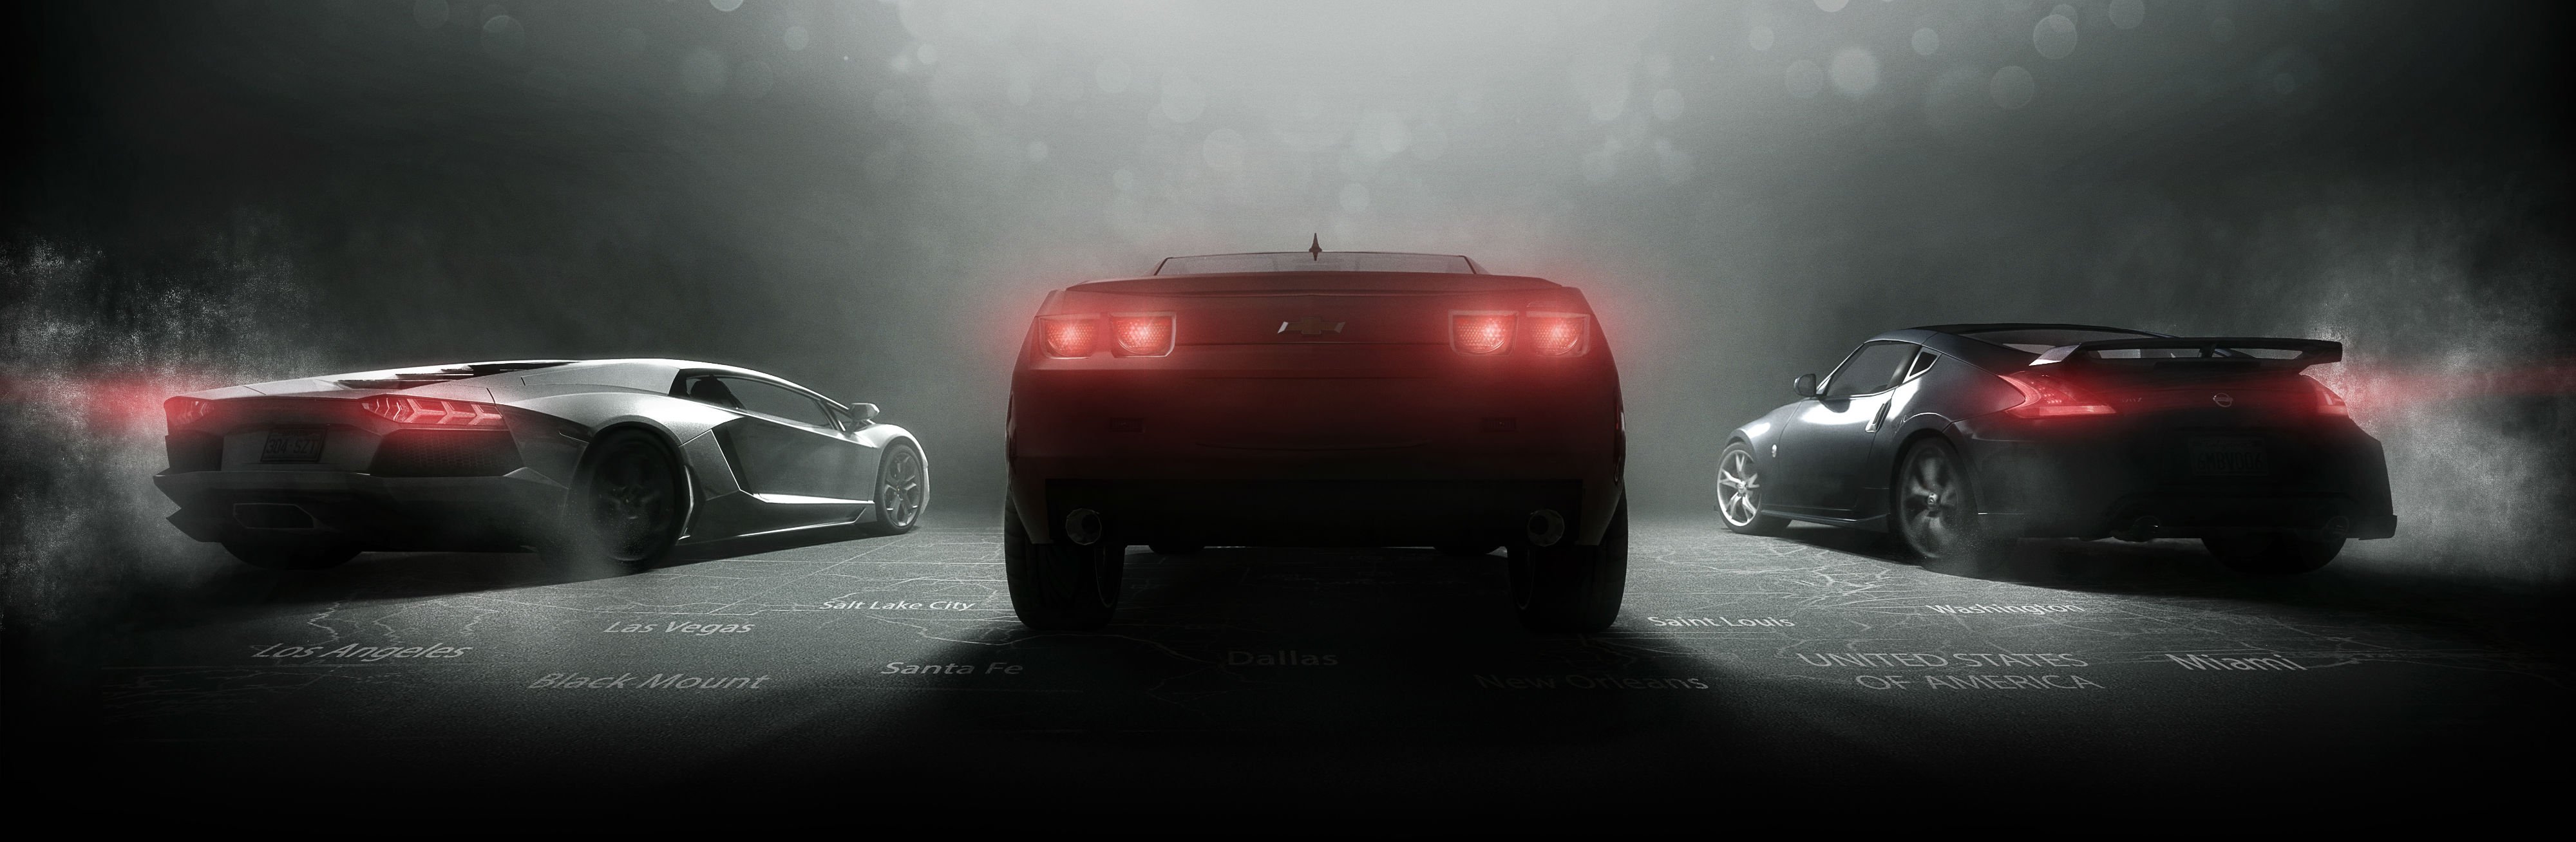 the crew, Racing, Race, Muscle, Tuning, Supercar, Crew, Rpg,  3 Wallpaper